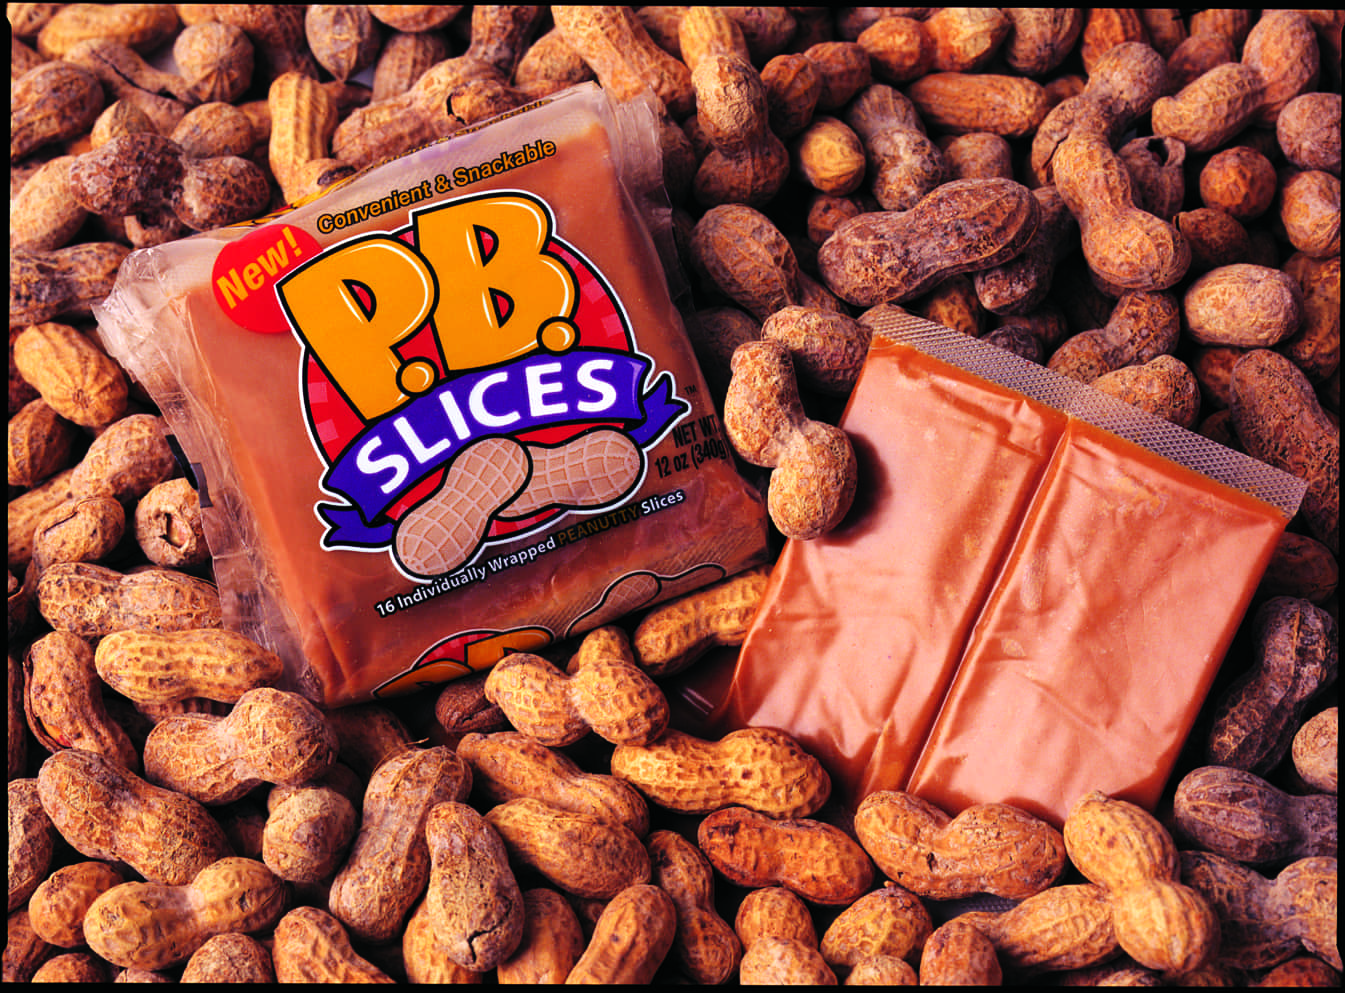 a picture of these questionable P.B. Slices.